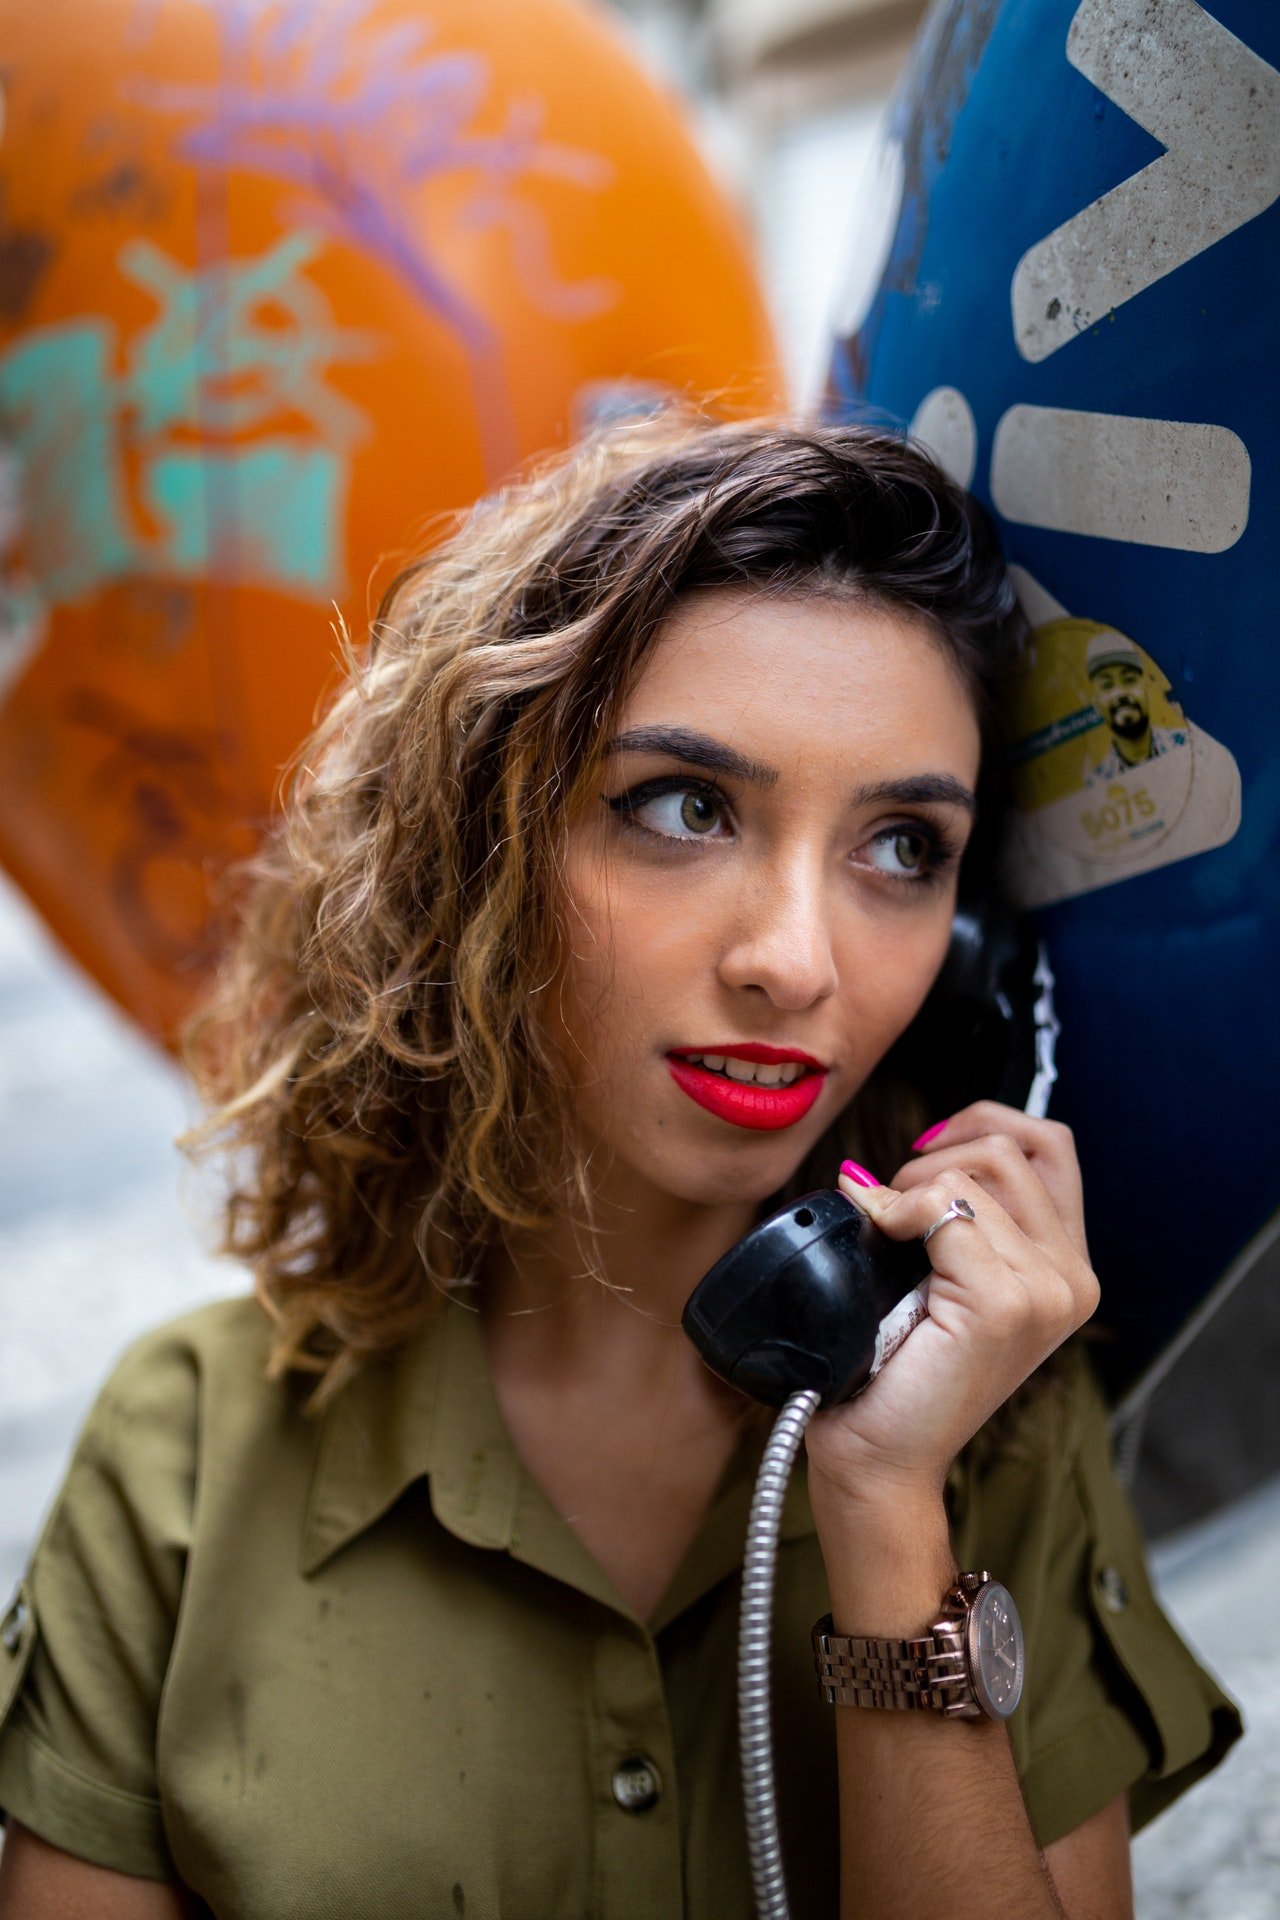 Photo of a woman holding a telephone | Photo: Pexels